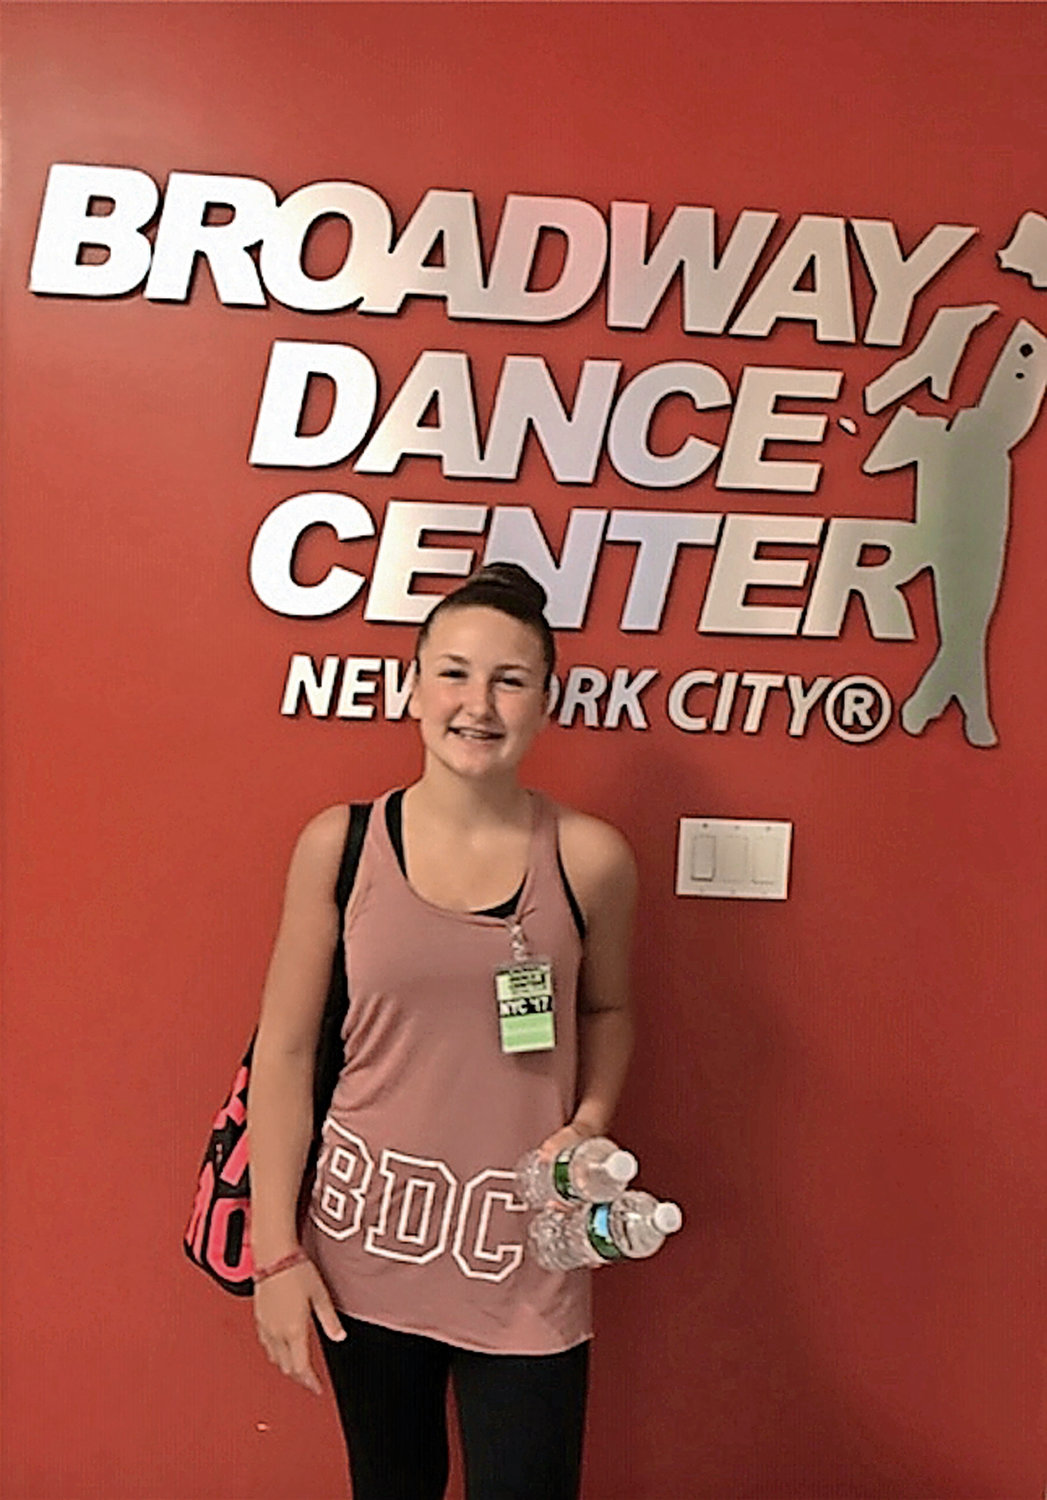 Jamison Novello, who died on March 22, attended dance training at Broadway Dance Center in Manhattan.